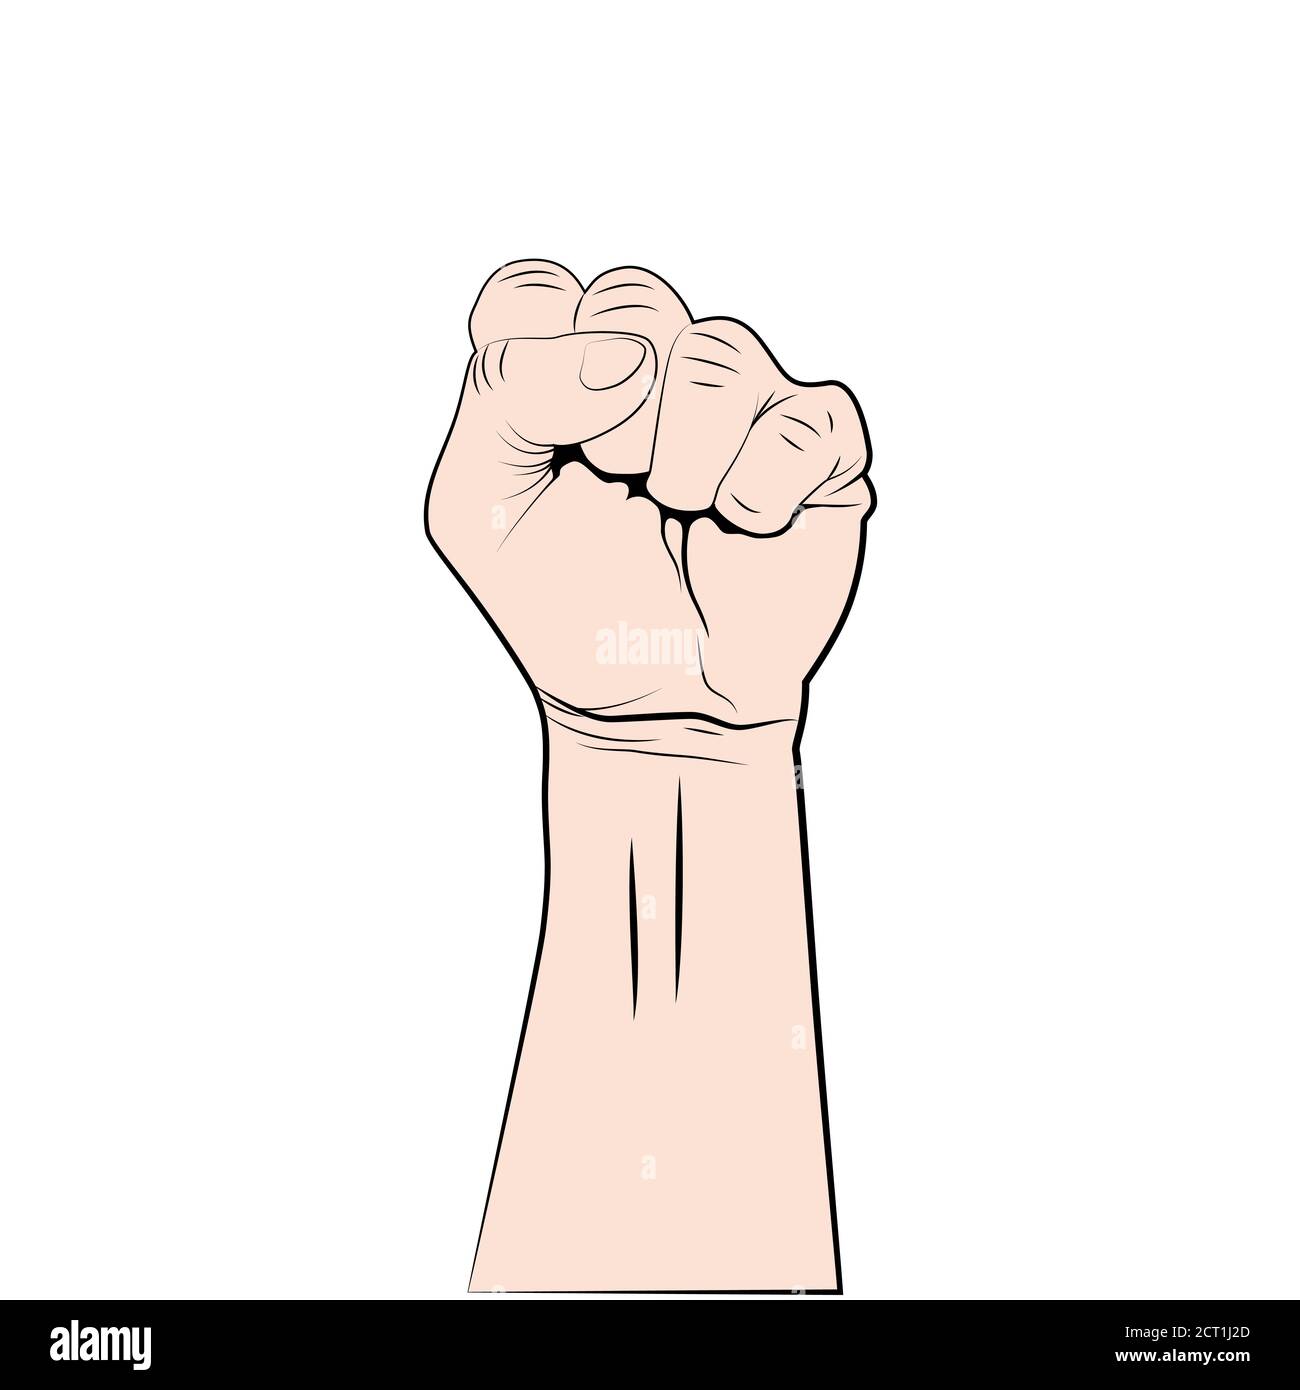 Fist up - symbol of protest, revolution or strength. Raised hand isolated on white background. Fist up concept sign. Vector Stock Vector